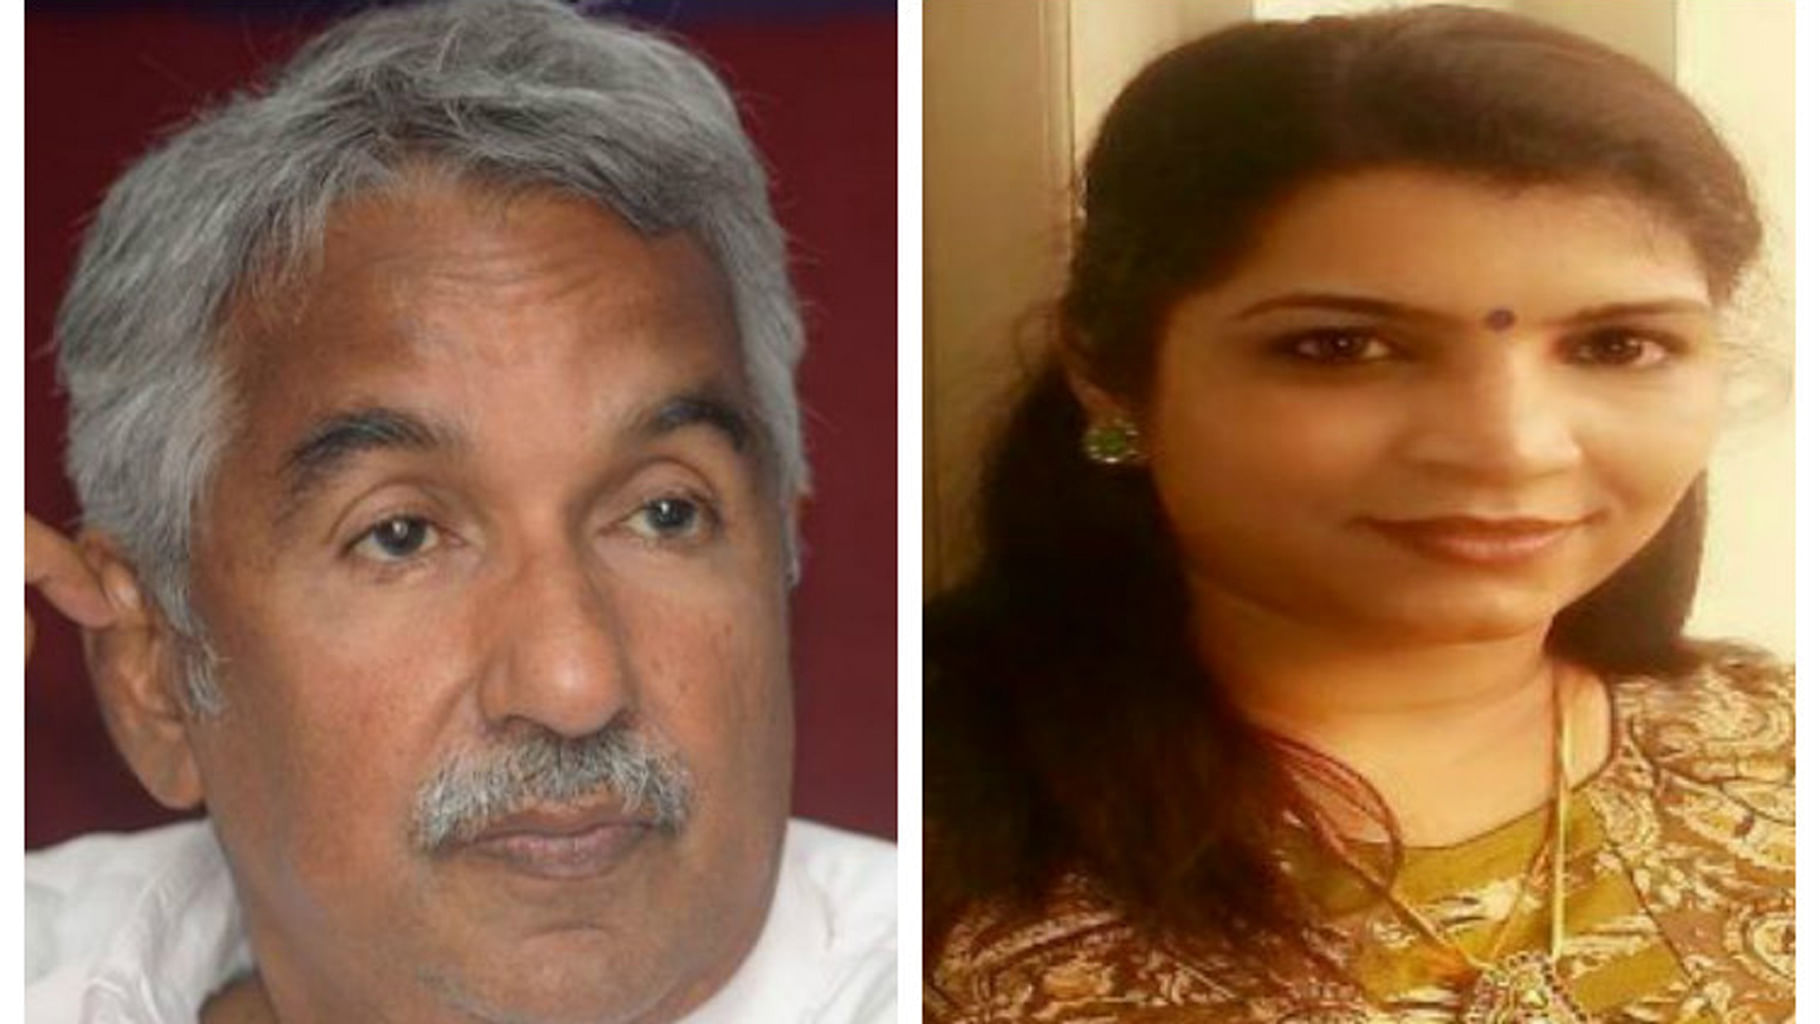 Kerala CM Oommen Chandy and solar scam accused Saritha Nair. (Photo Courtesy: The News Minute)